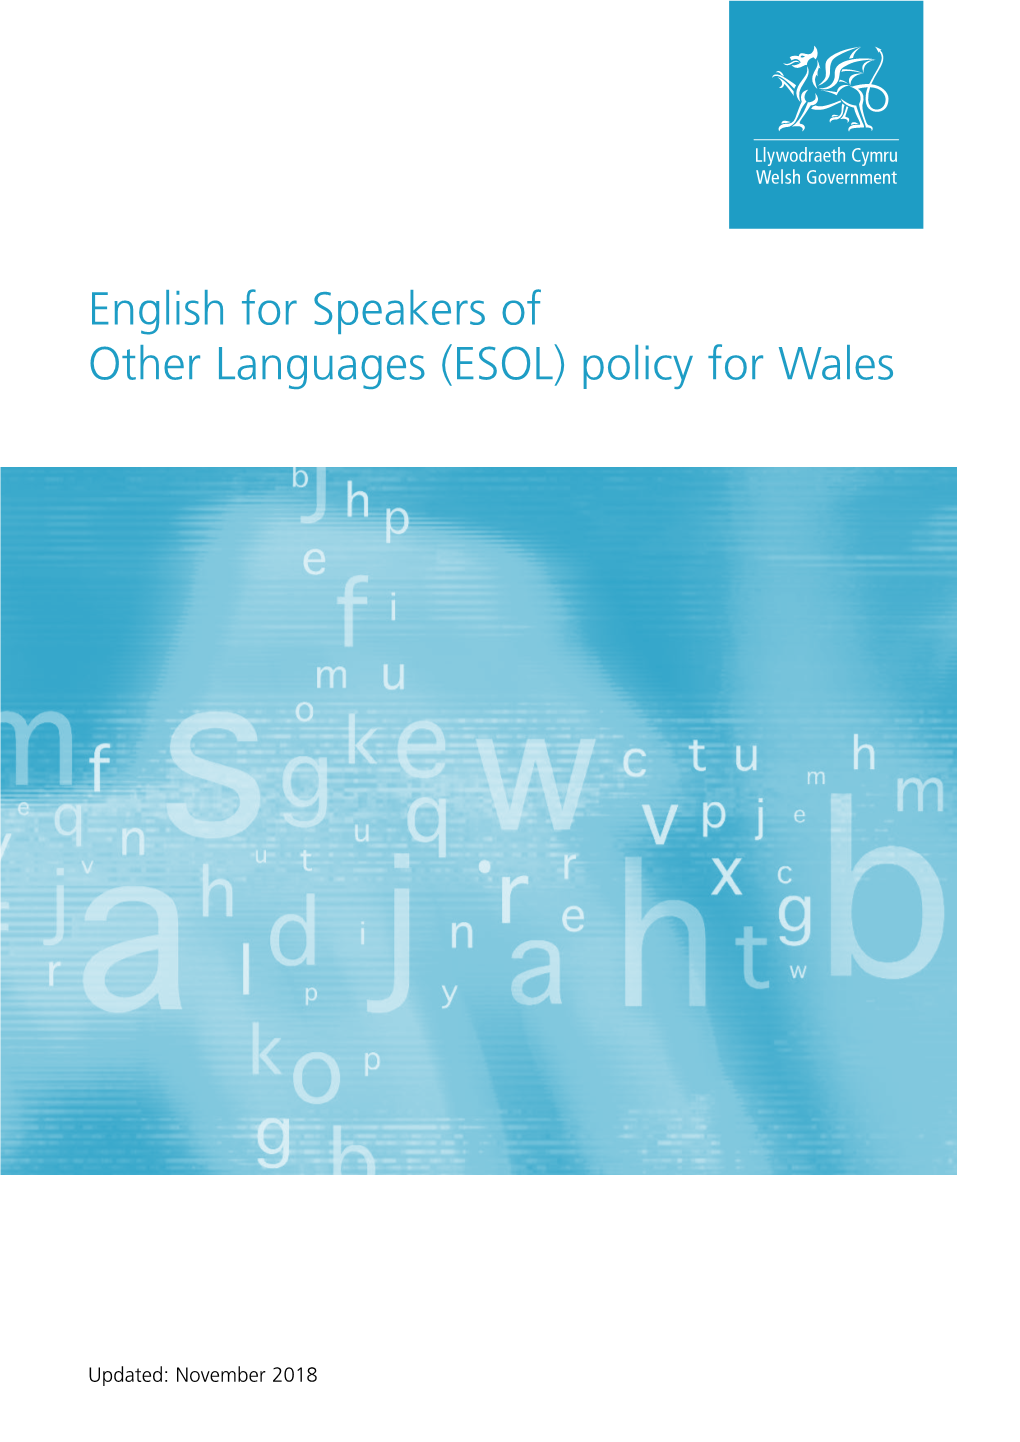 English for Speakers of Other Languages (ESOL) Policy for Wales